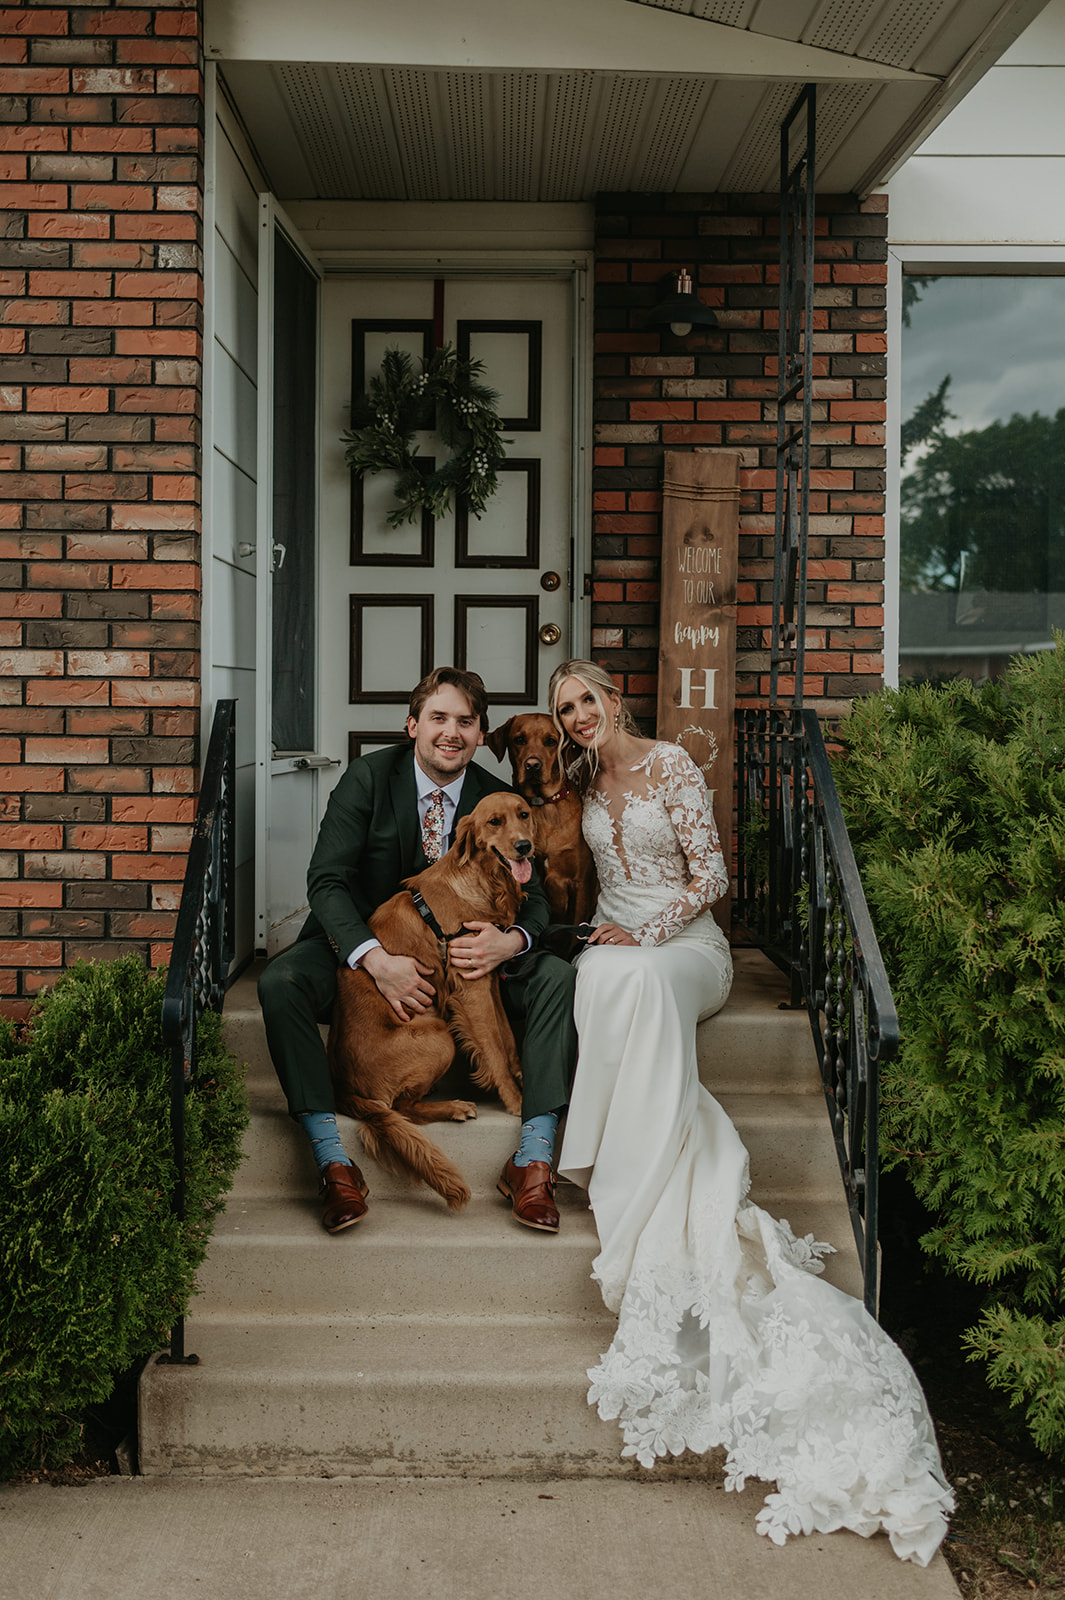 unique wedding portraits, wedding portraits on front step, incorporating your pet on wedding day